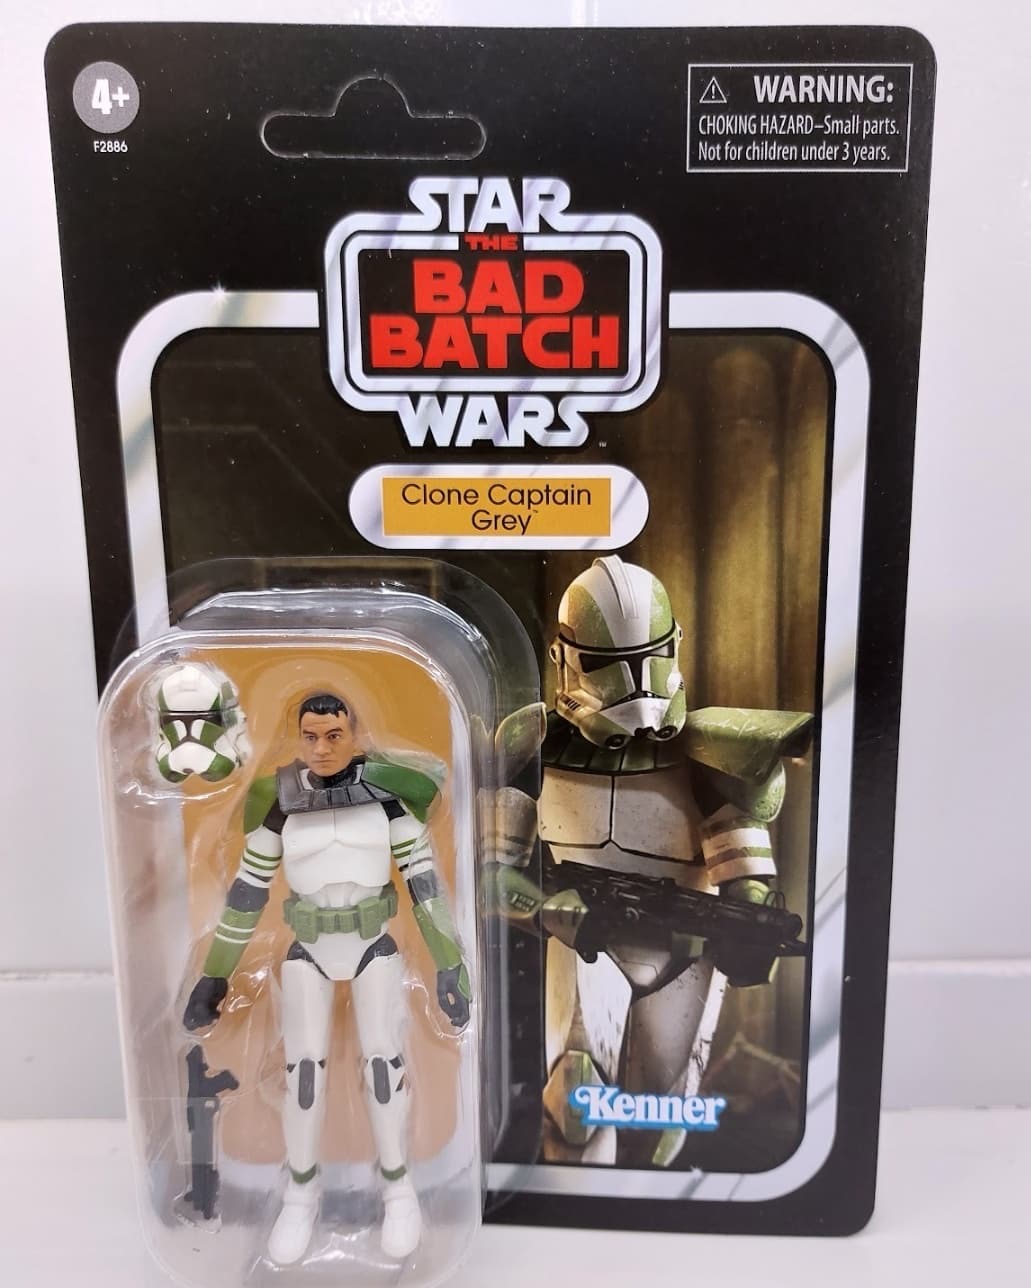 Star Wars Vintage Collection Bad Batch 4pack Amazon Exclusive UNPUNCHED PREORDER